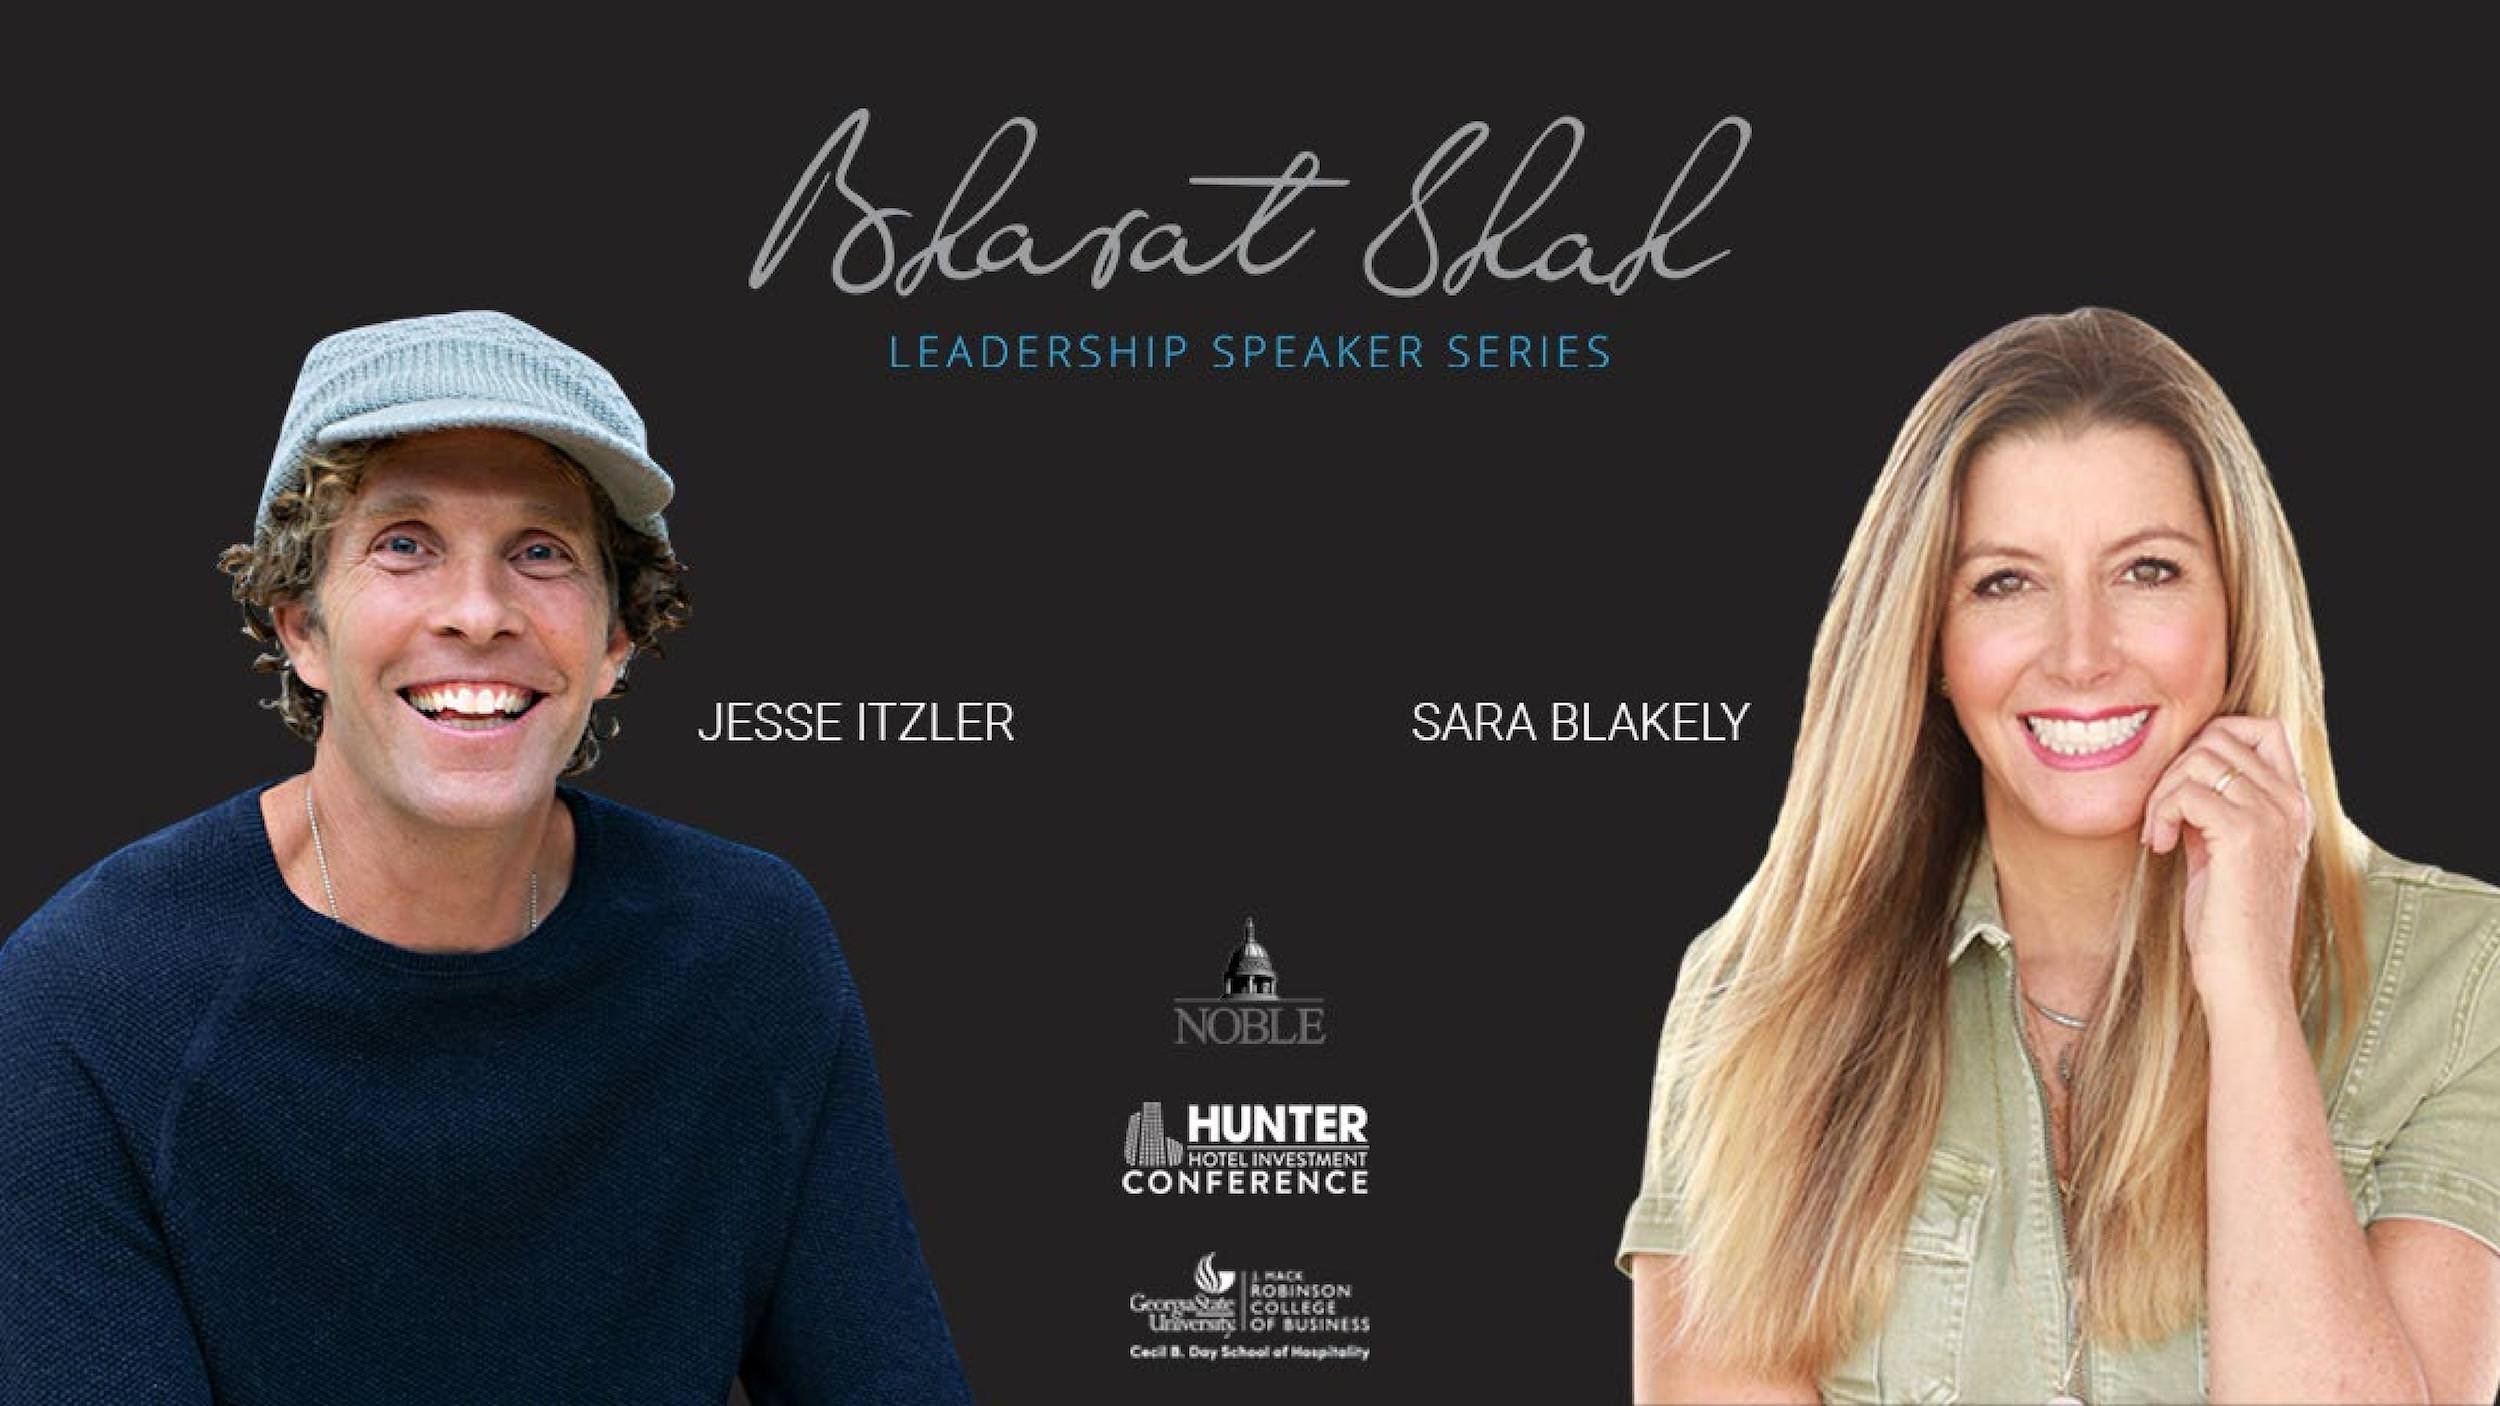 The Marriage of Sara Blakely and Jesse Itzler